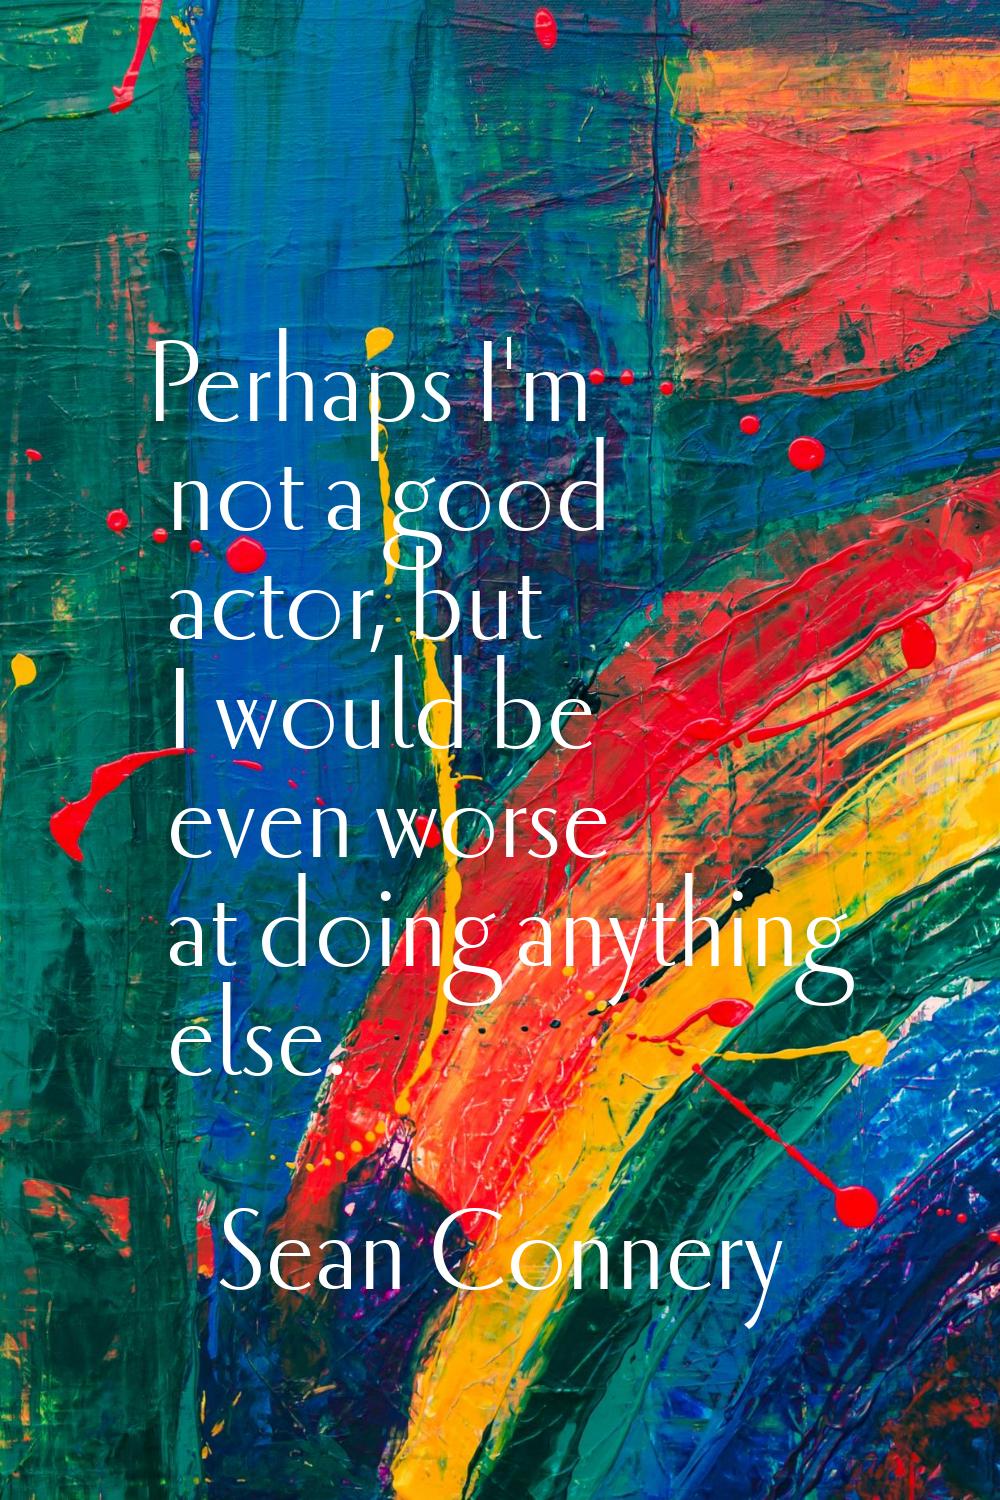 Perhaps I'm not a good actor, but I would be even worse at doing anything else.